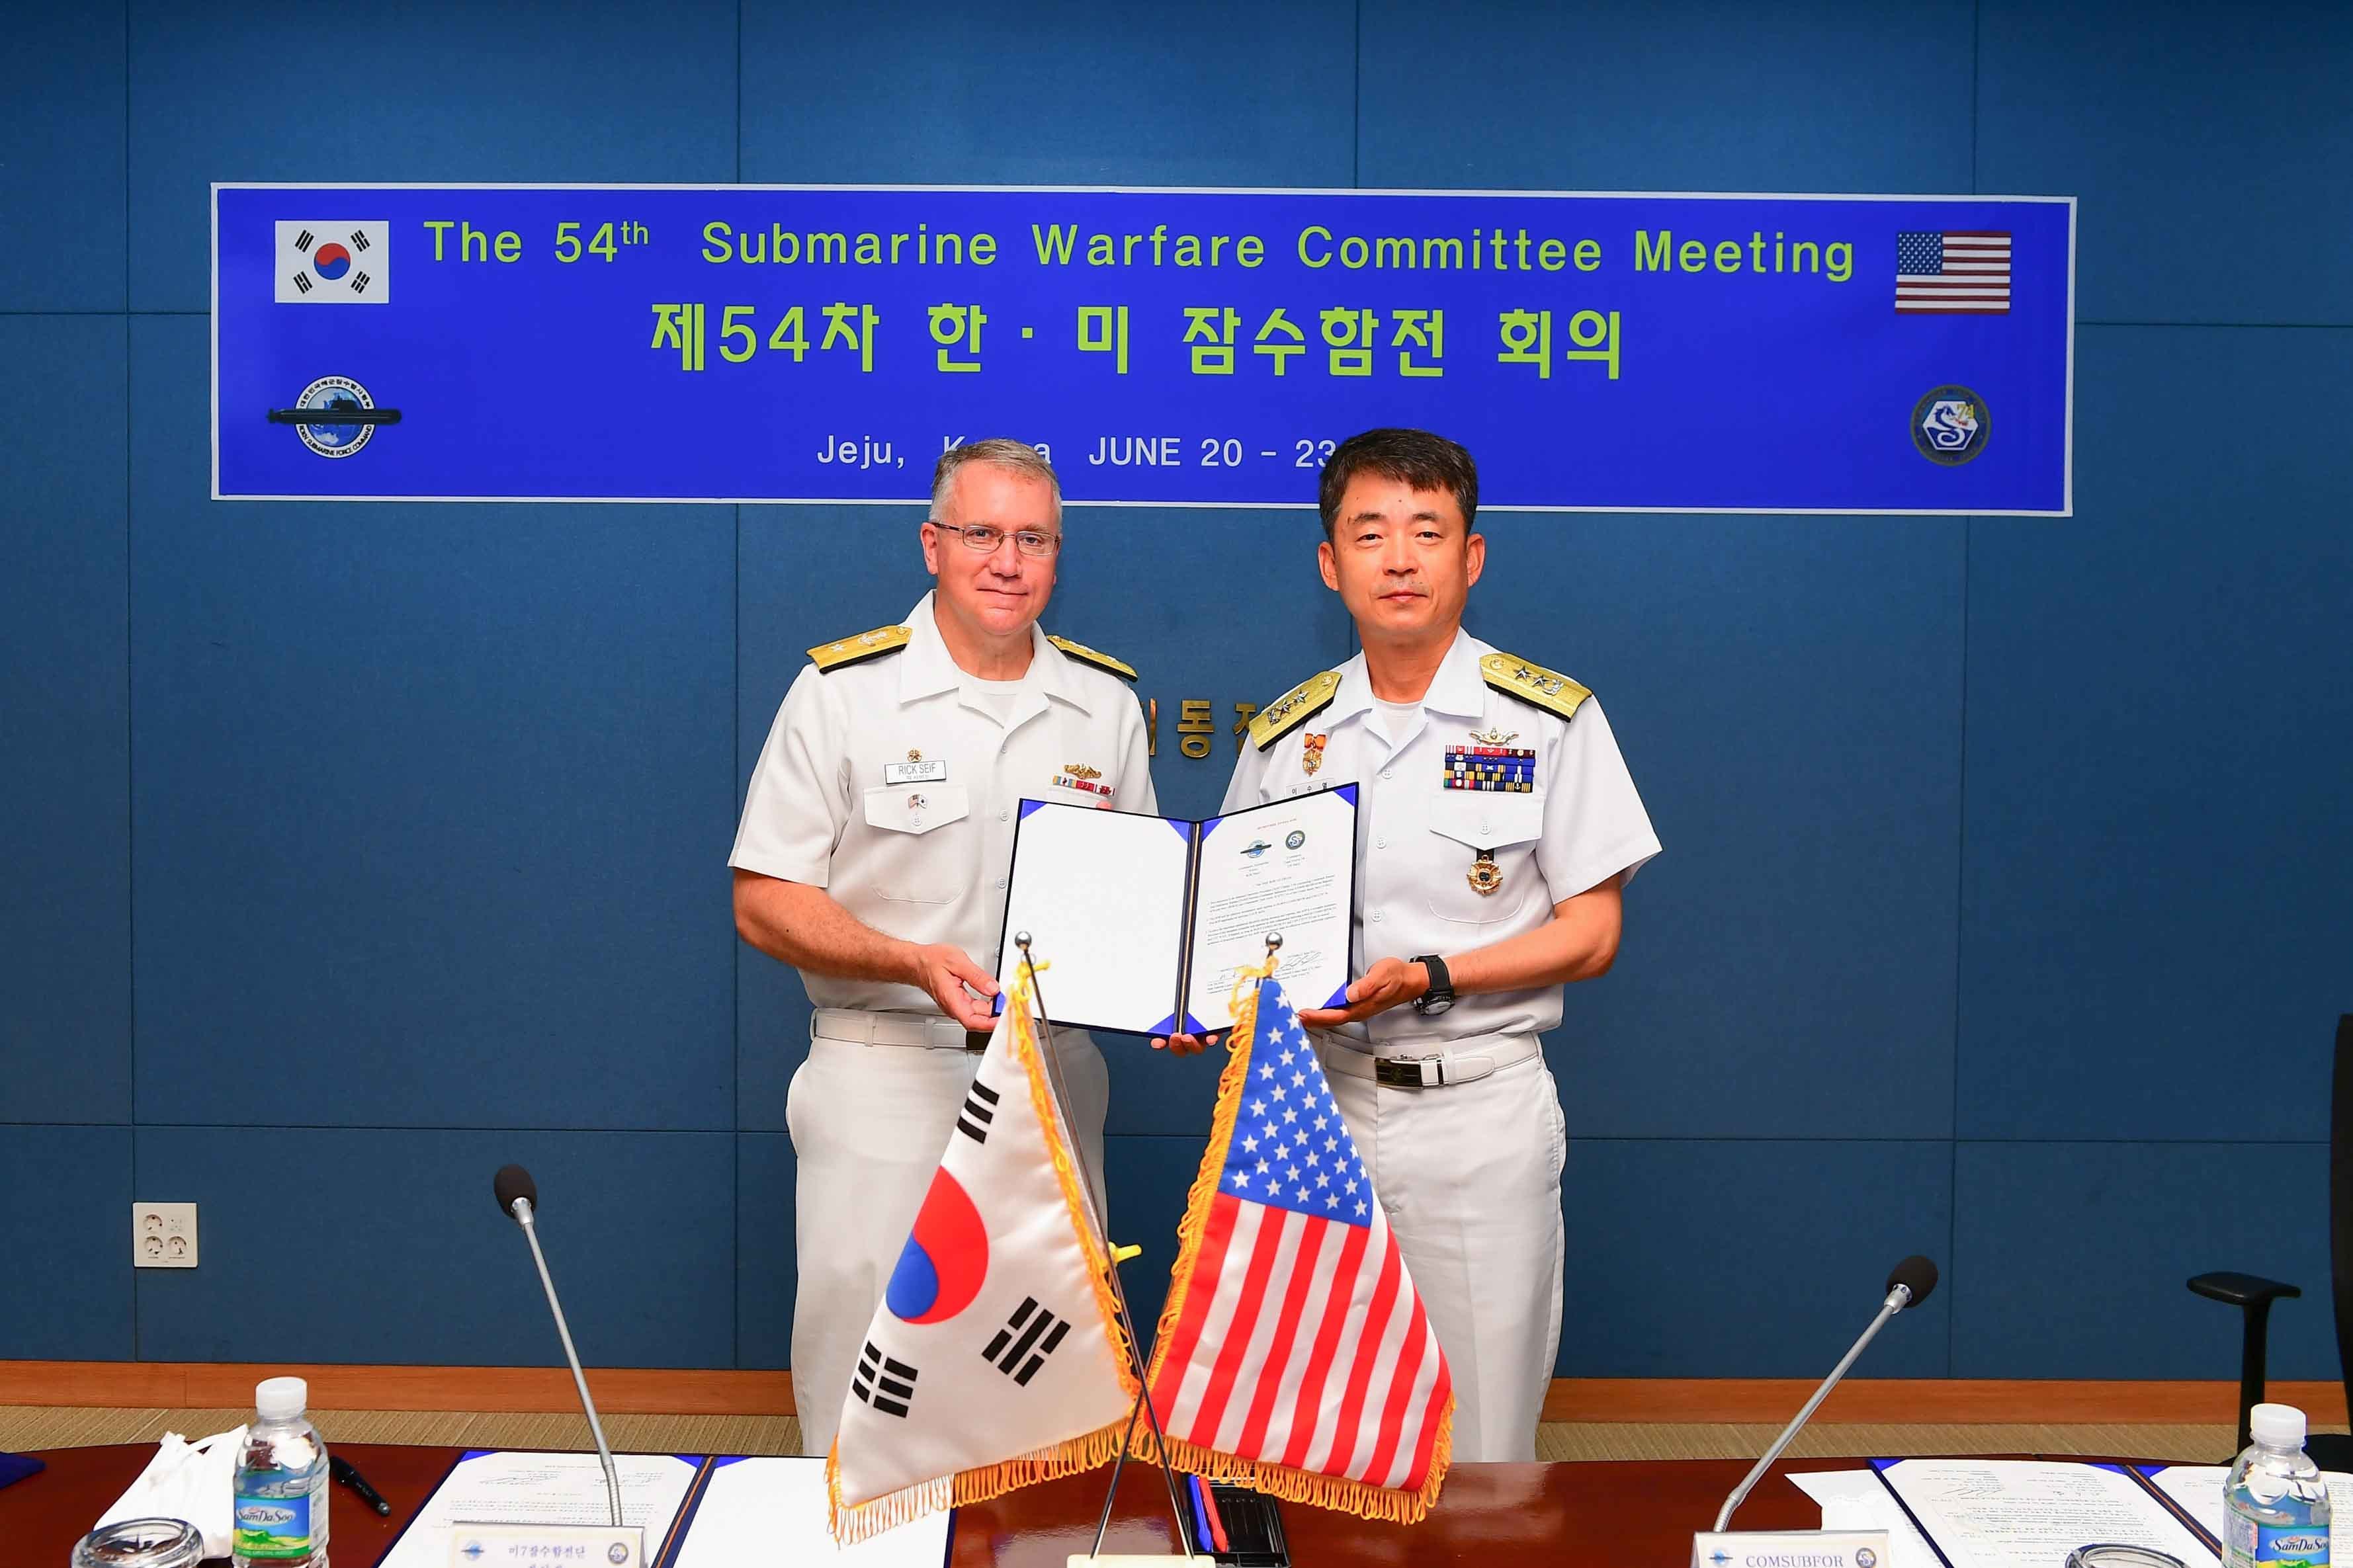 JEJU, Republic of Korea (June 22, 2022) Rear Adm. Rick Seif, Commander, Submarine Group 7, left, and Rear Adm. Lee Su Youl, Commander, Republic of Korea (ROK) Navy Submarine Force, pose with the signed memorandum at the conclusion of the 54th semiannual Submarine Warfare Committee Meeting (SWCM) in Jeju, South Korea, June 22, 2022. Over the past 28 years, SWCM has brought together leaders of both the U.S. and ROK submarine forces to discuss combined submarine training and force integration. (Photo courtesy of ROK Public Affairs)